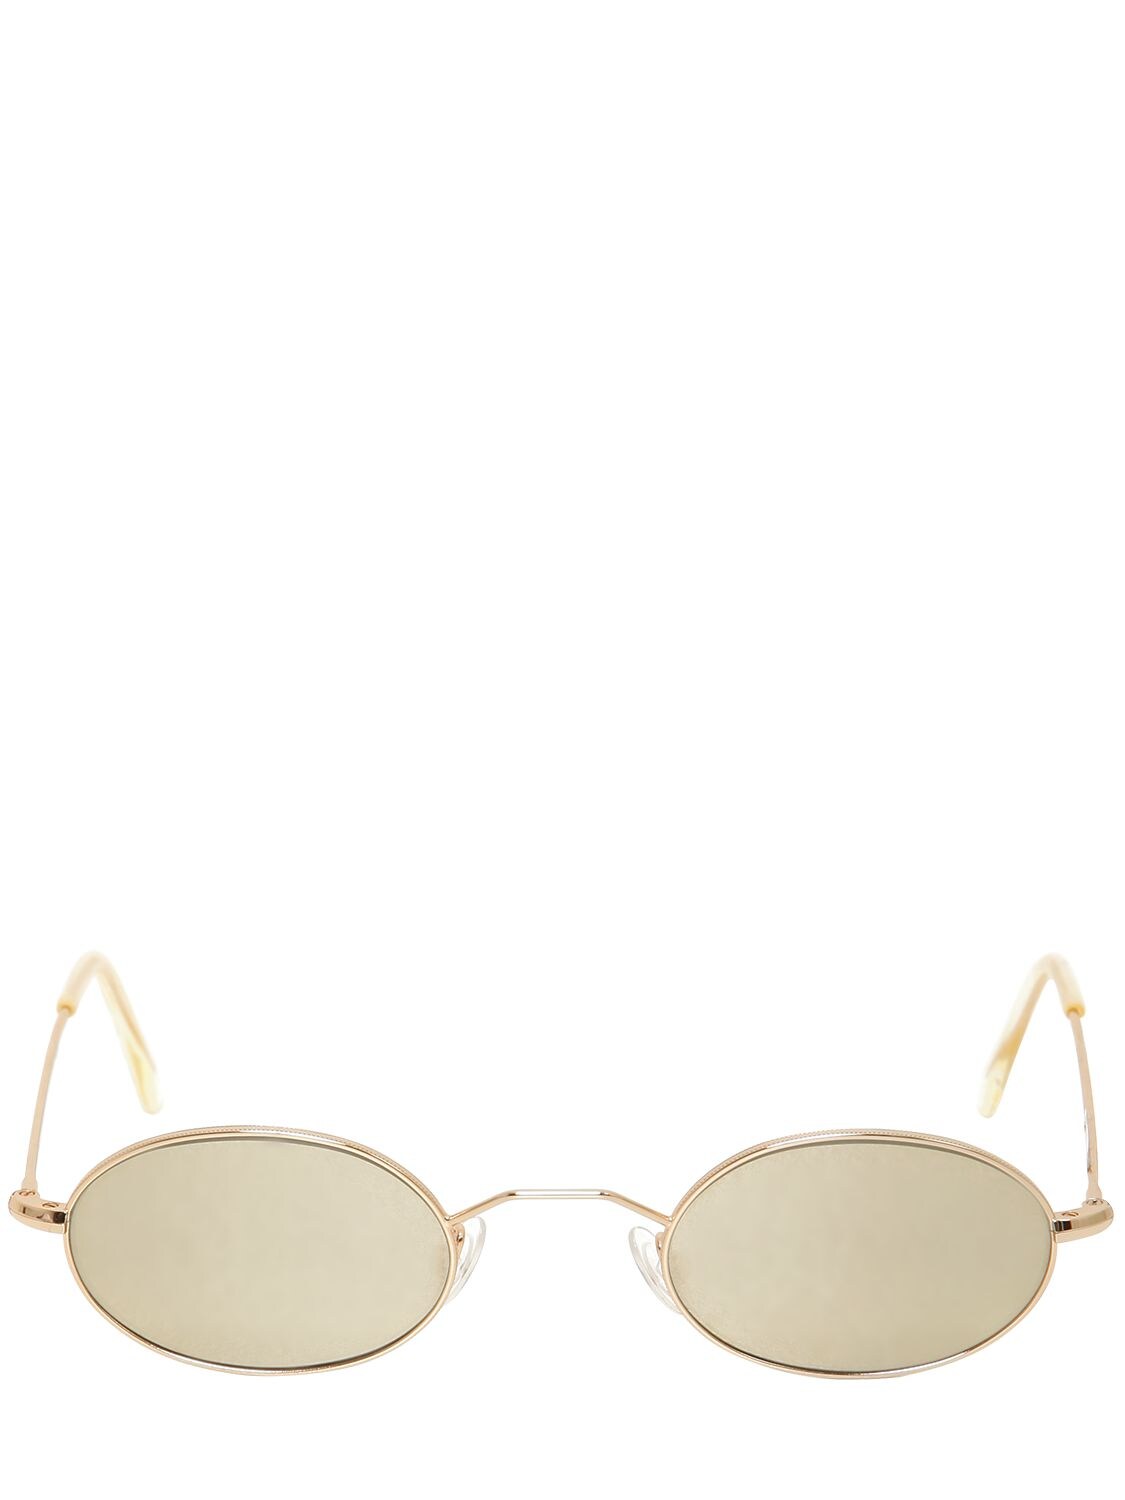 Andy Wolf Armstrong Oval Sunglasses In Gold